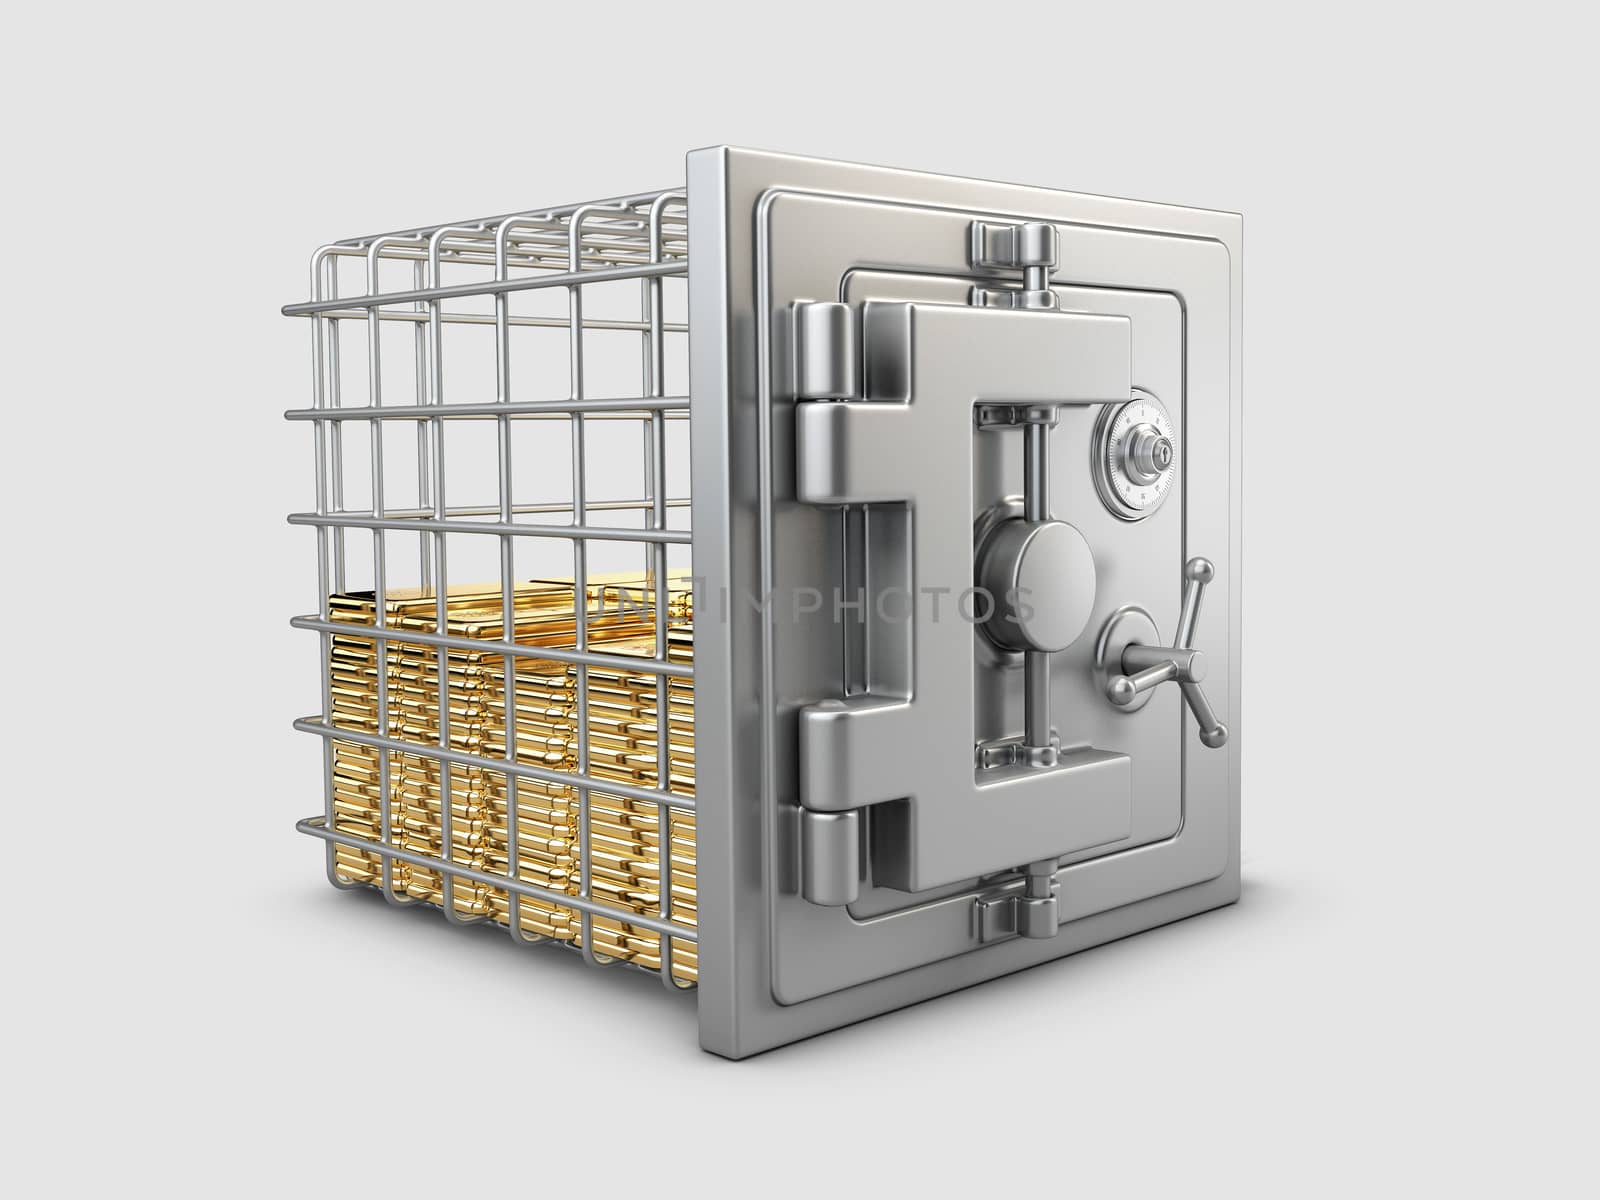 3d Rendering of Security metal safe with gold bars inside, clipping path include by tussik